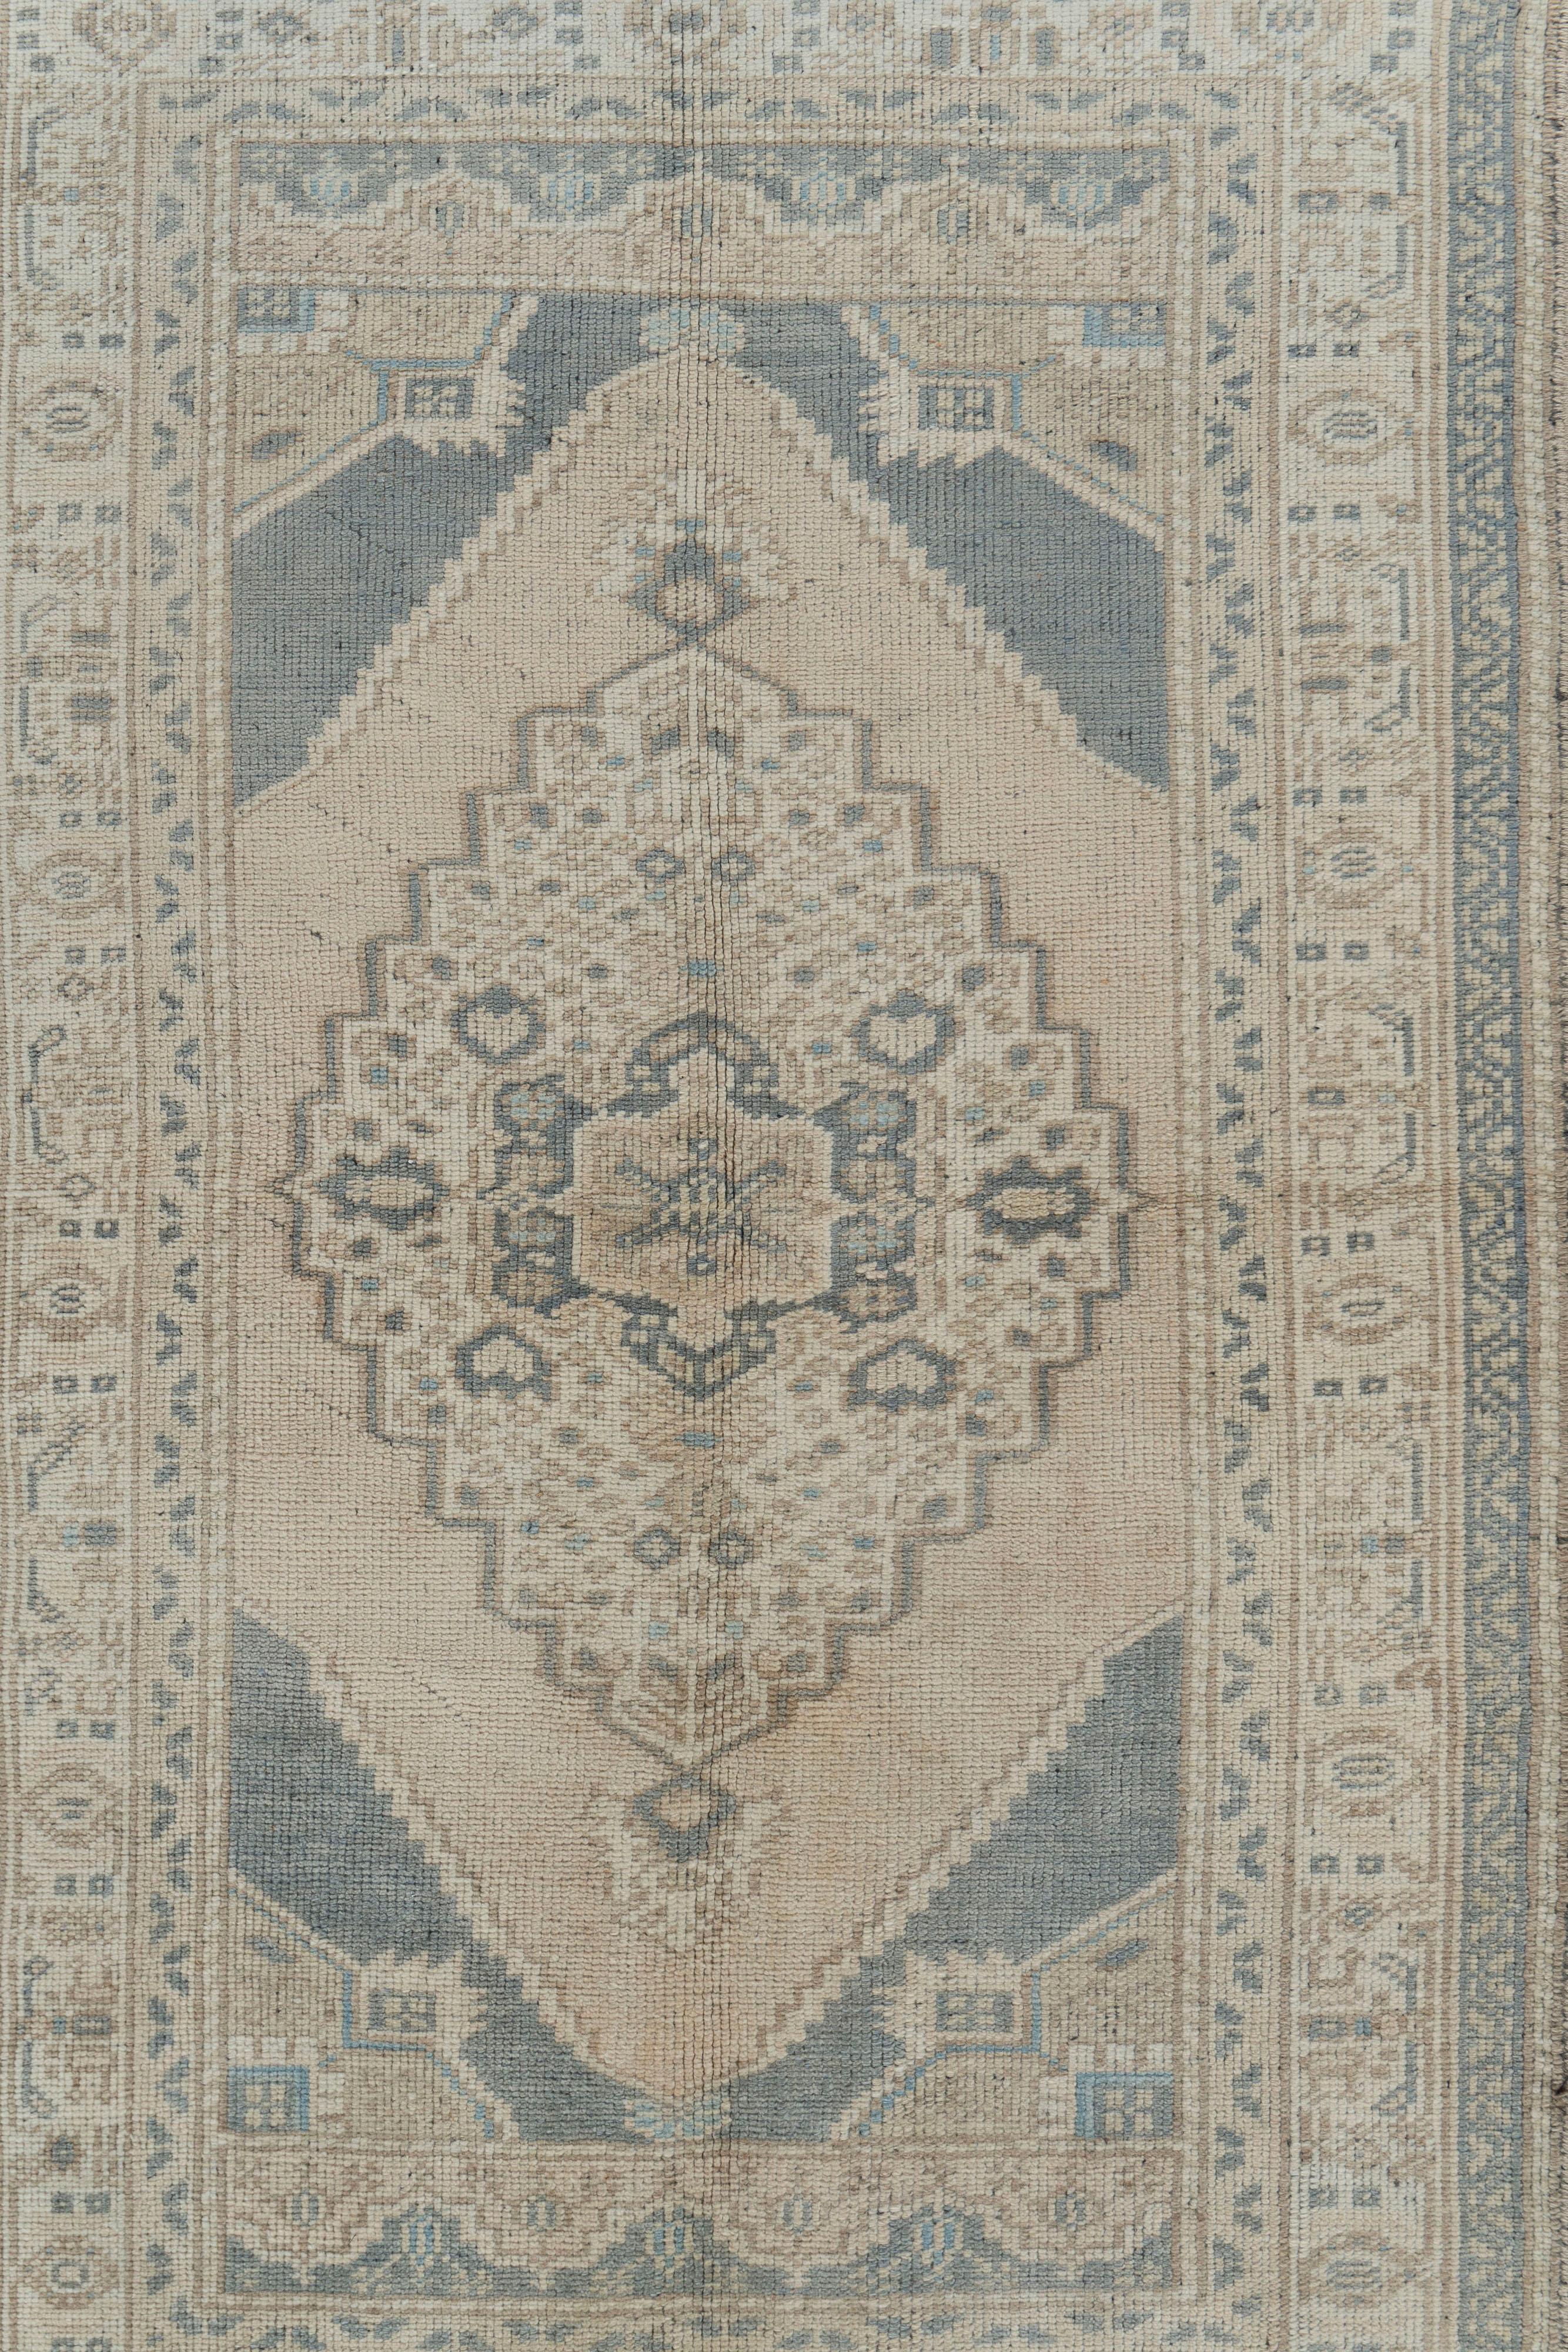 Vintage Turkish Oushak Area Rug 3'7 X 5'5. Even today, Oushak rugs are still the first choice of professional interior designers. Sometimes this is because when grading Oushak carpets, carpet connoisseurs will not only look at the overall quality of